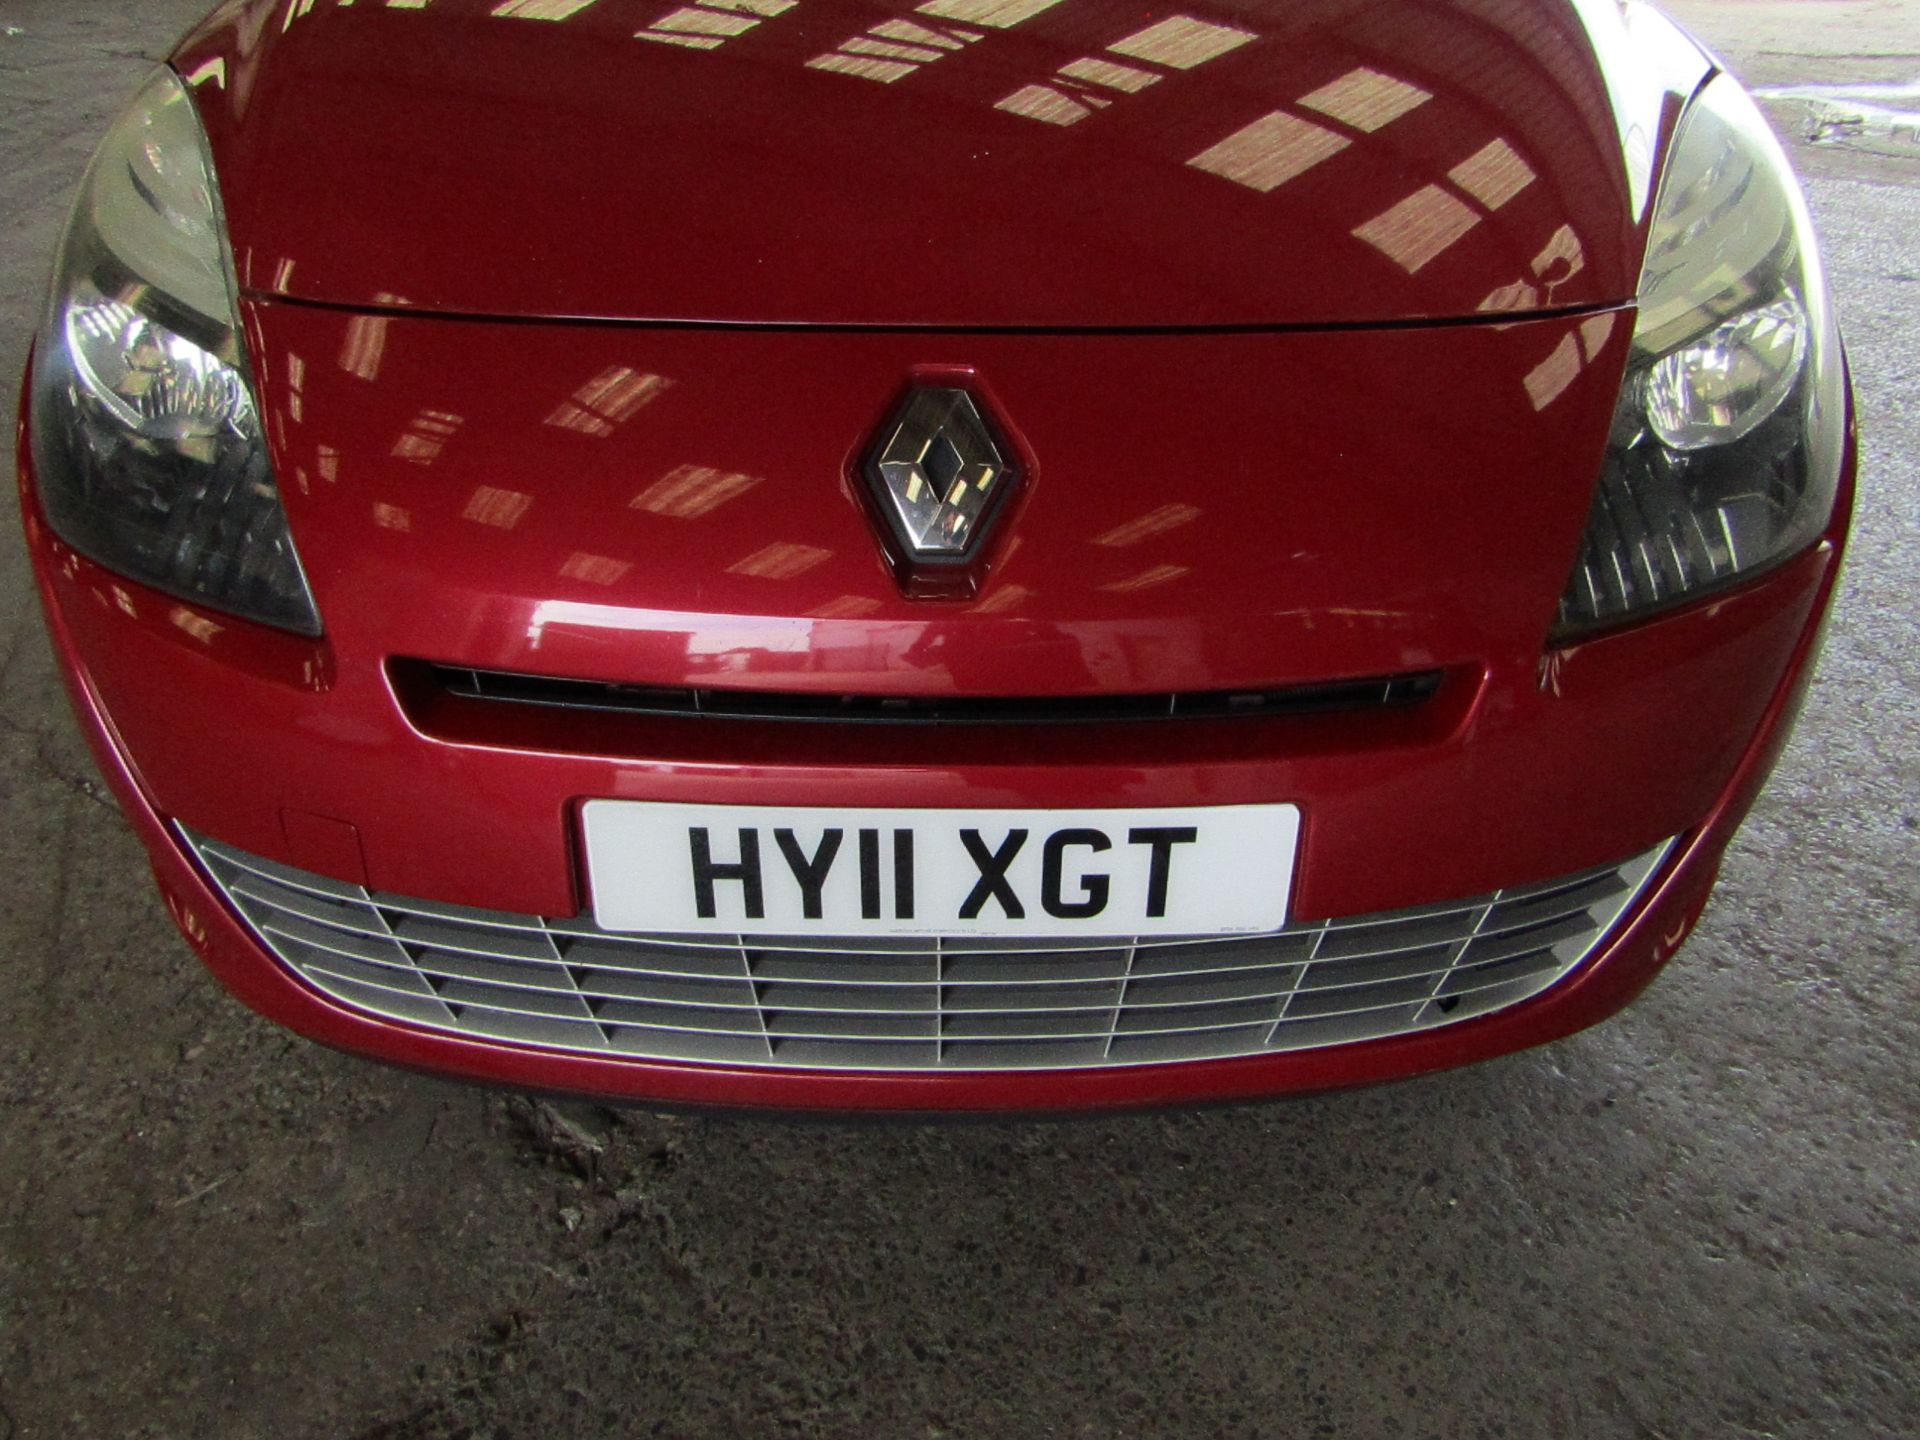 11 Plate Renault Grand Scenic 1.6 VVTi Dynamique Tom Tom 7 seats, CAT N (recorded as such 12/02/ - Image 8 of 44